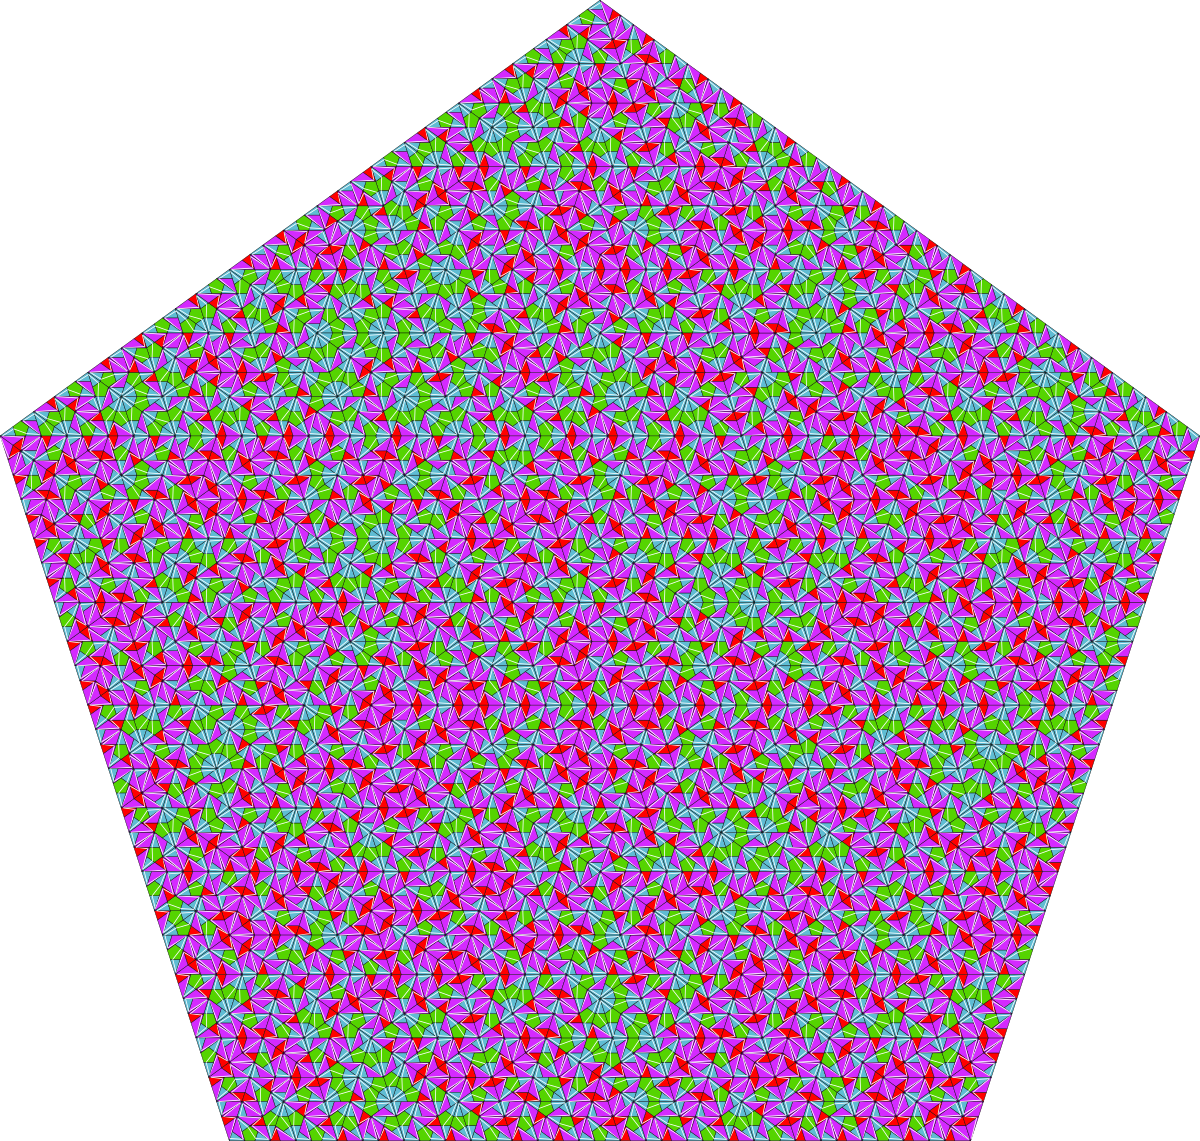 Patch FASS-Curve of the Pentagon Substitution Tiling